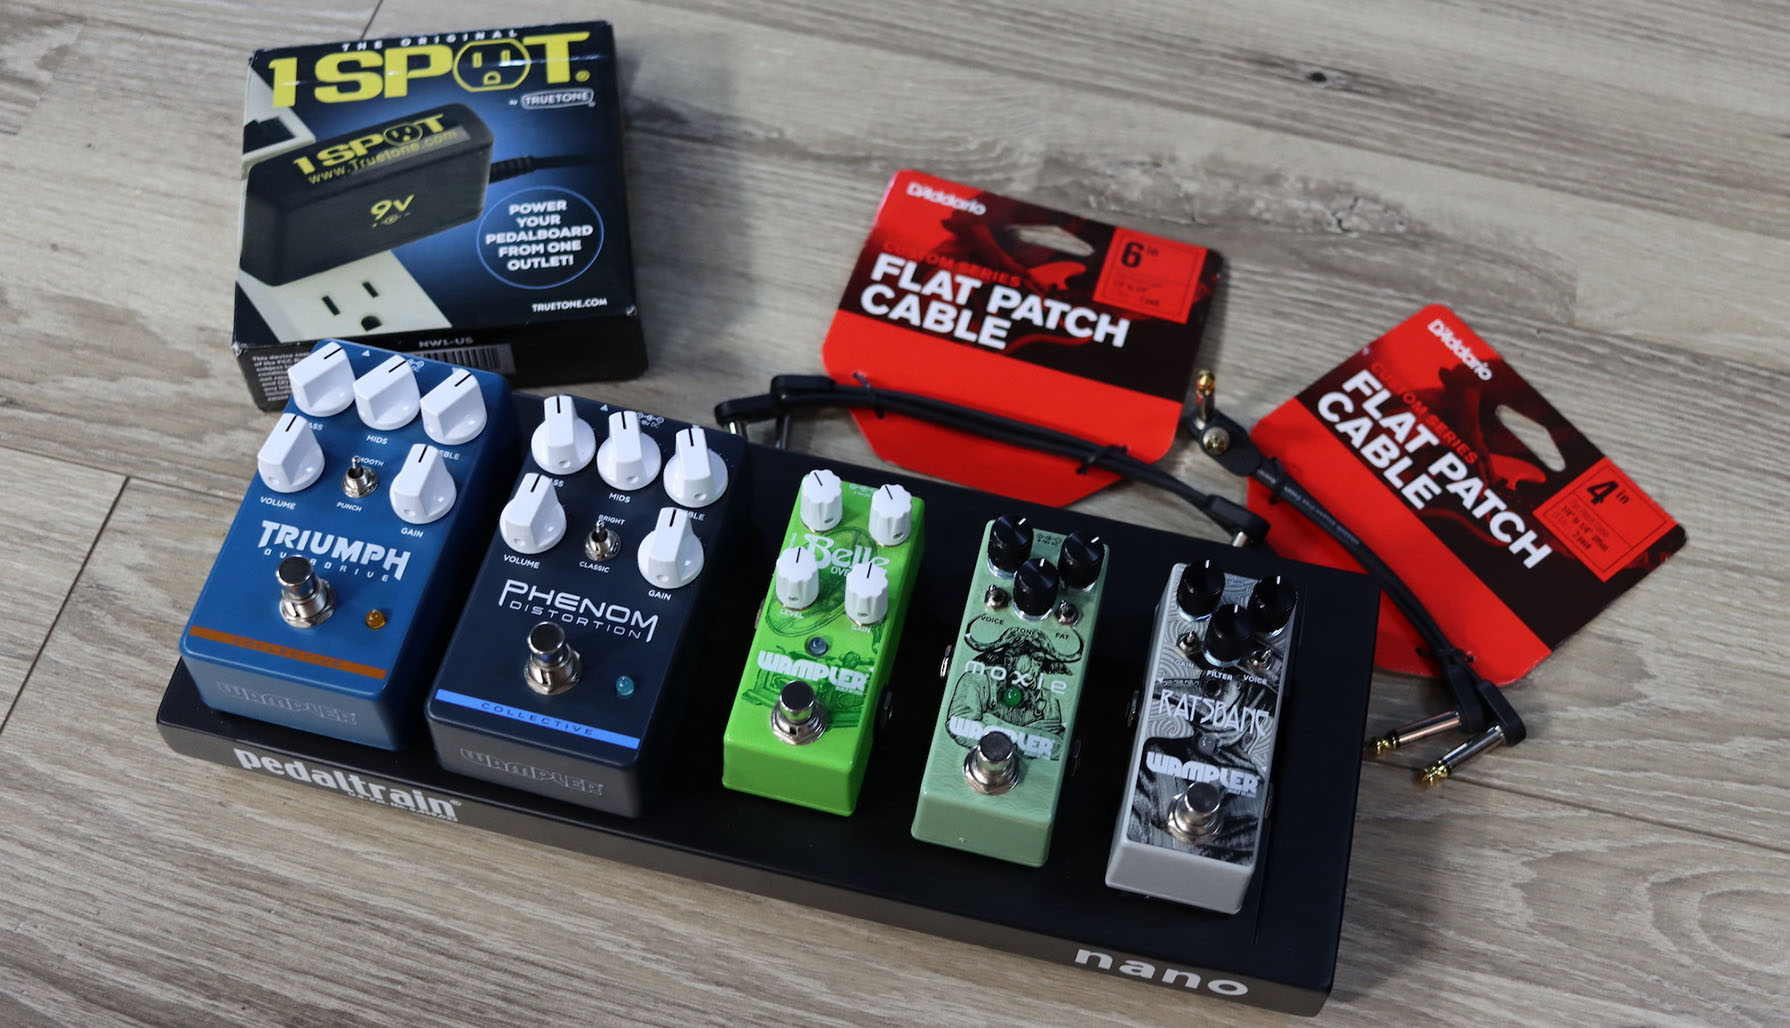 Wampler Pedal Board Competition Prize